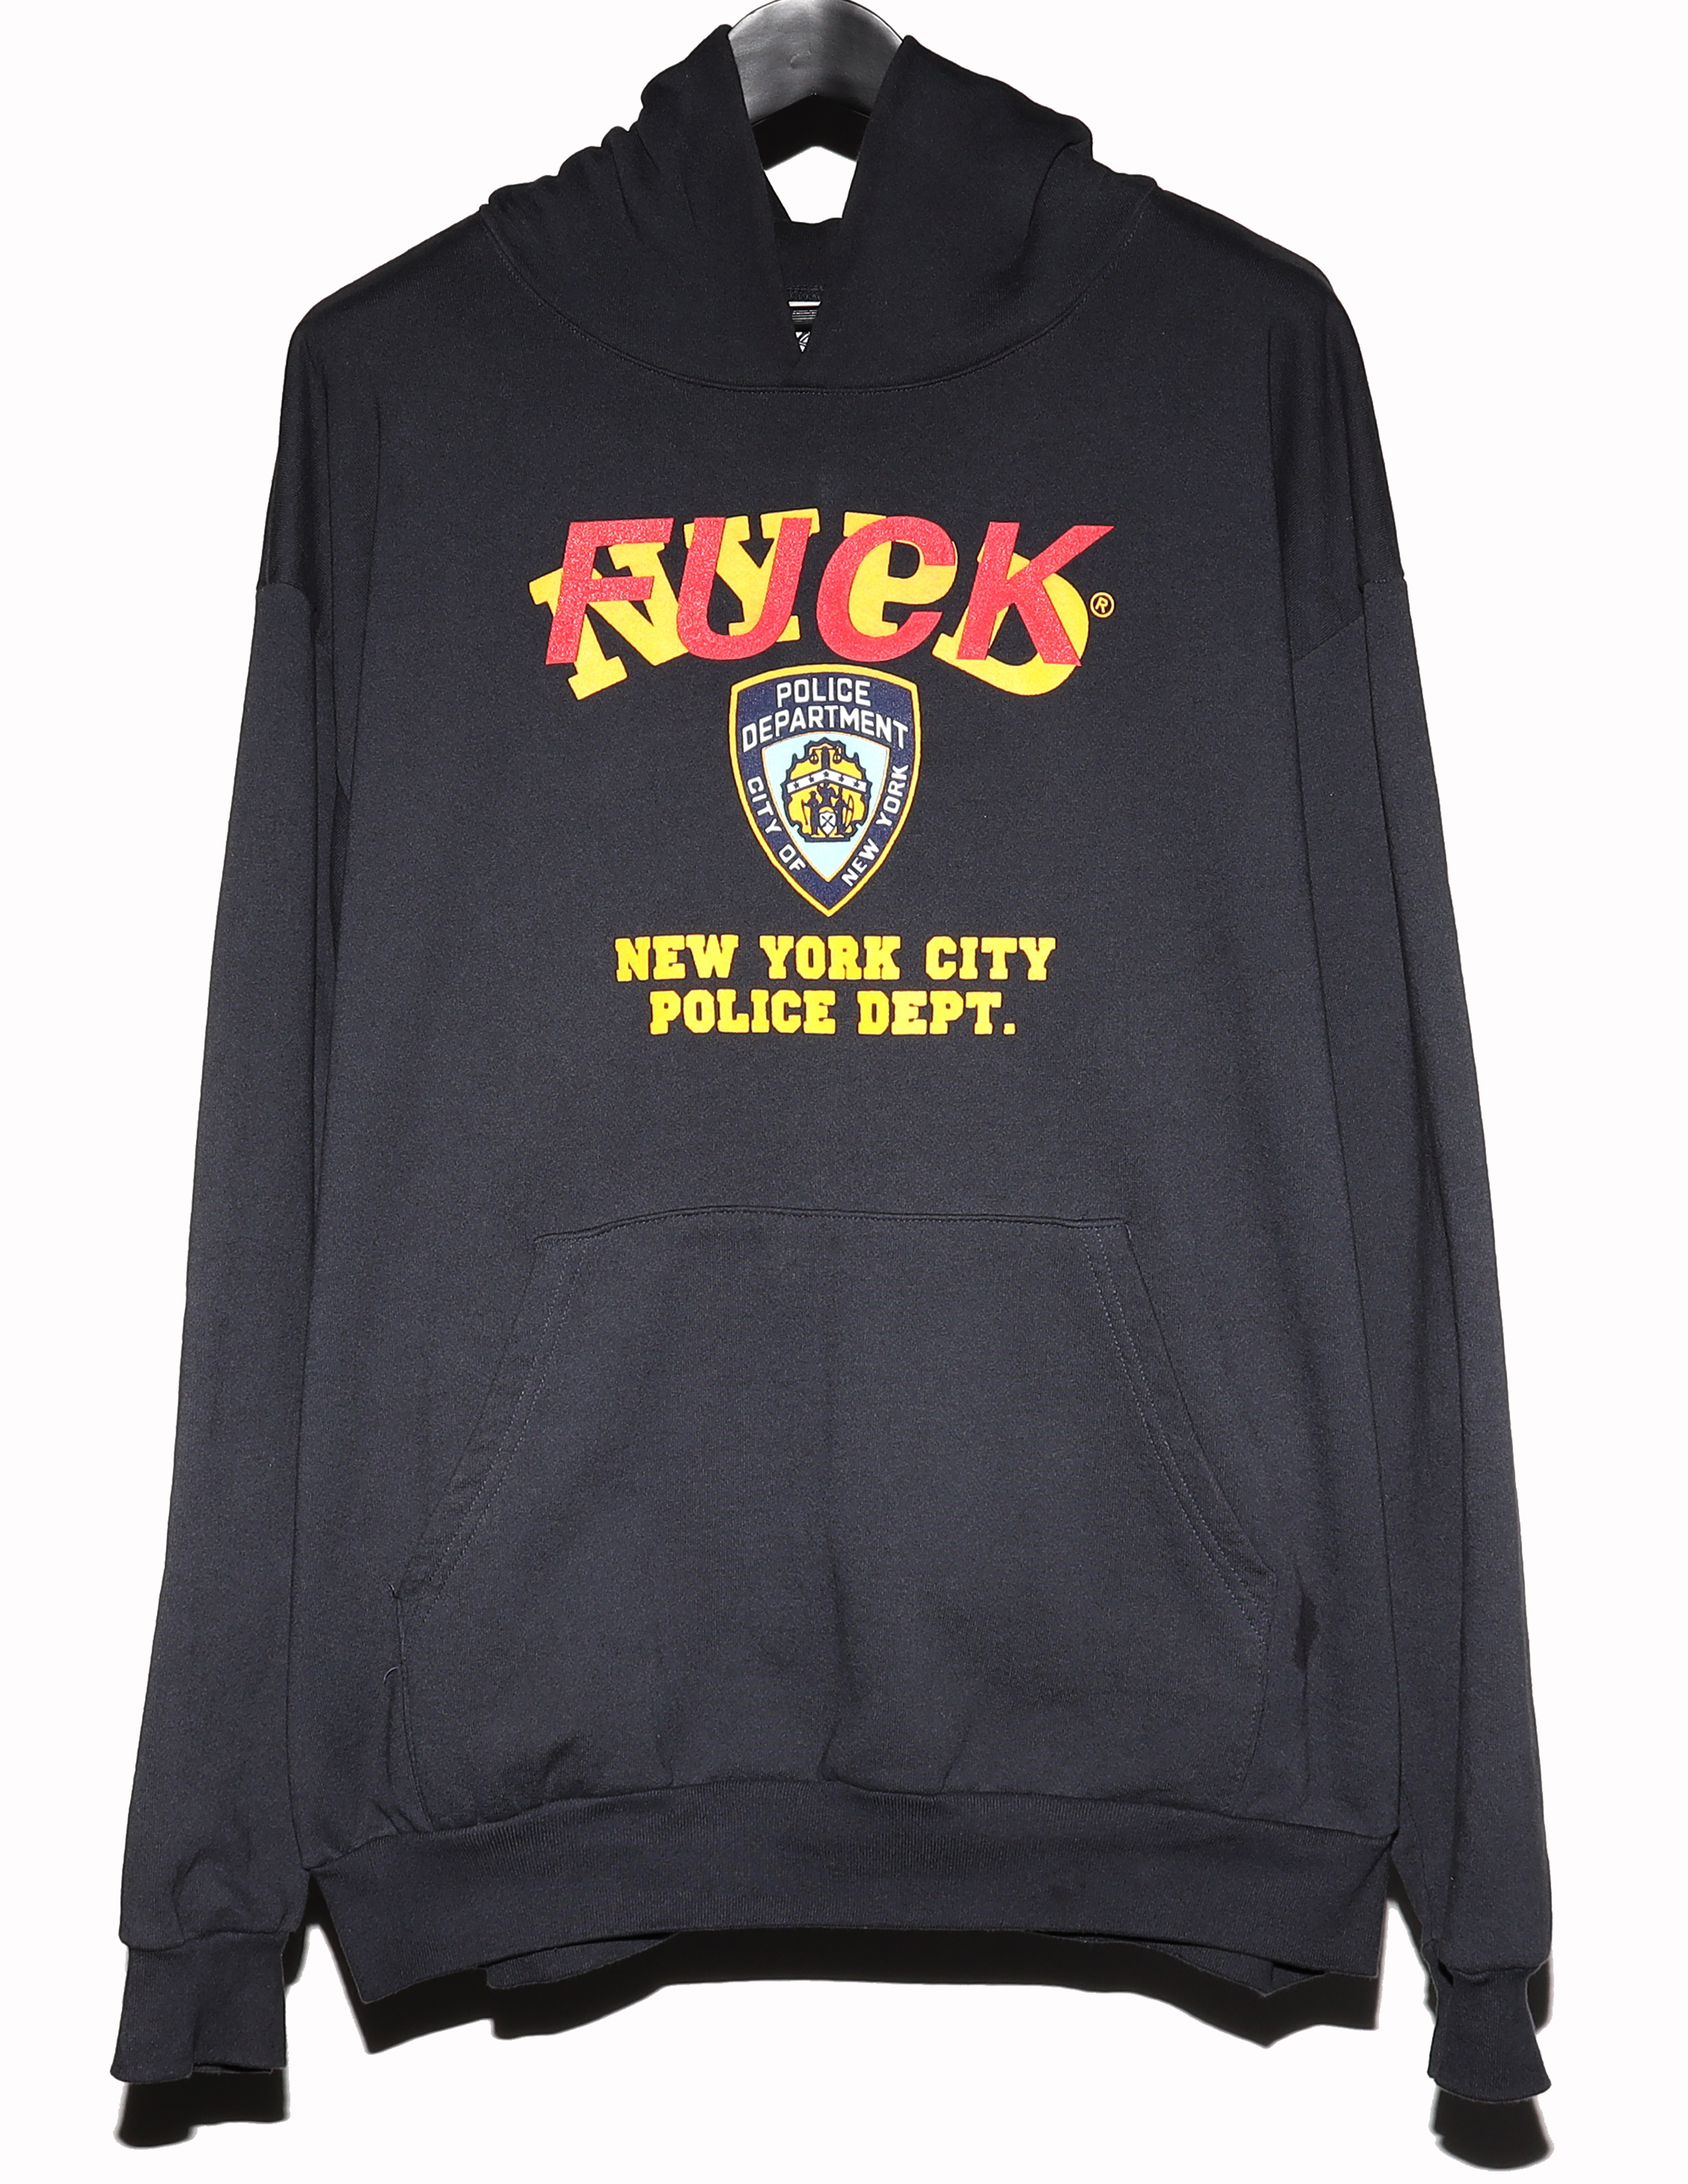 Other Designers (B).Stroy Fuck NYPD Hoodie, digitaltrenches